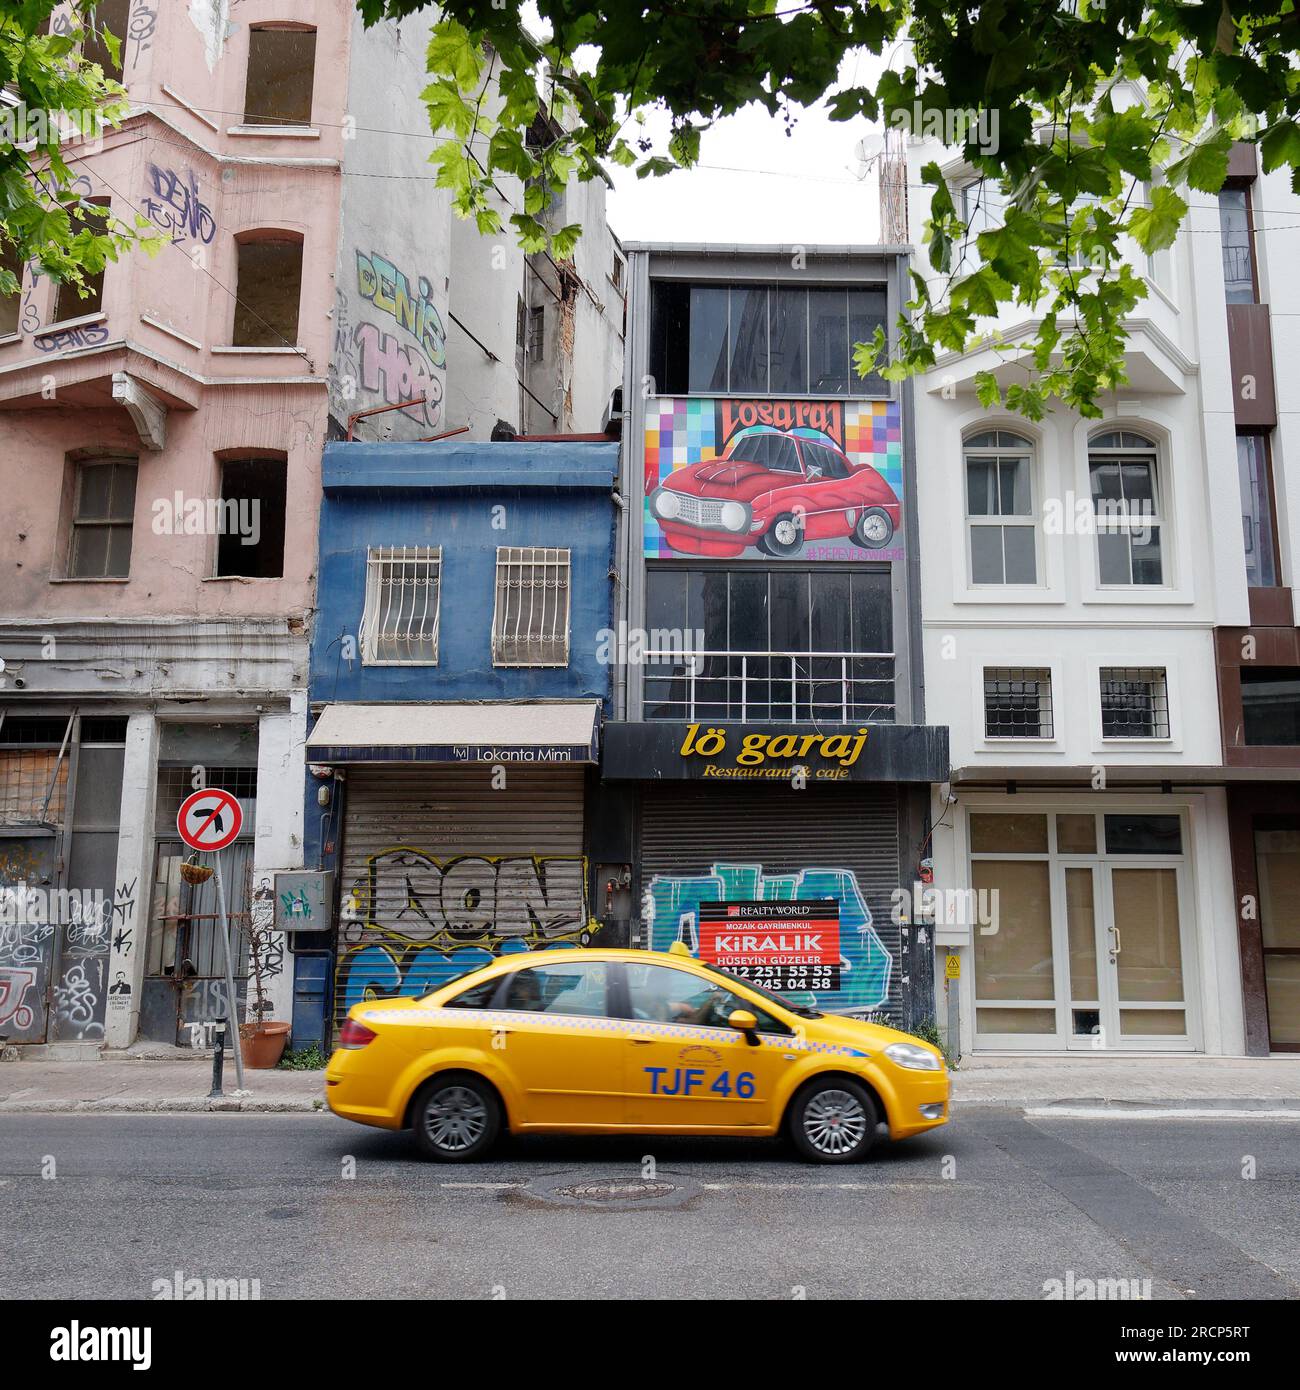 Yellow taxi on a street with shuttered down shops in the Karakoy neighbourhood of Istanbul with a ed car illustrated on the wall of a building. Turkey Stock Photo